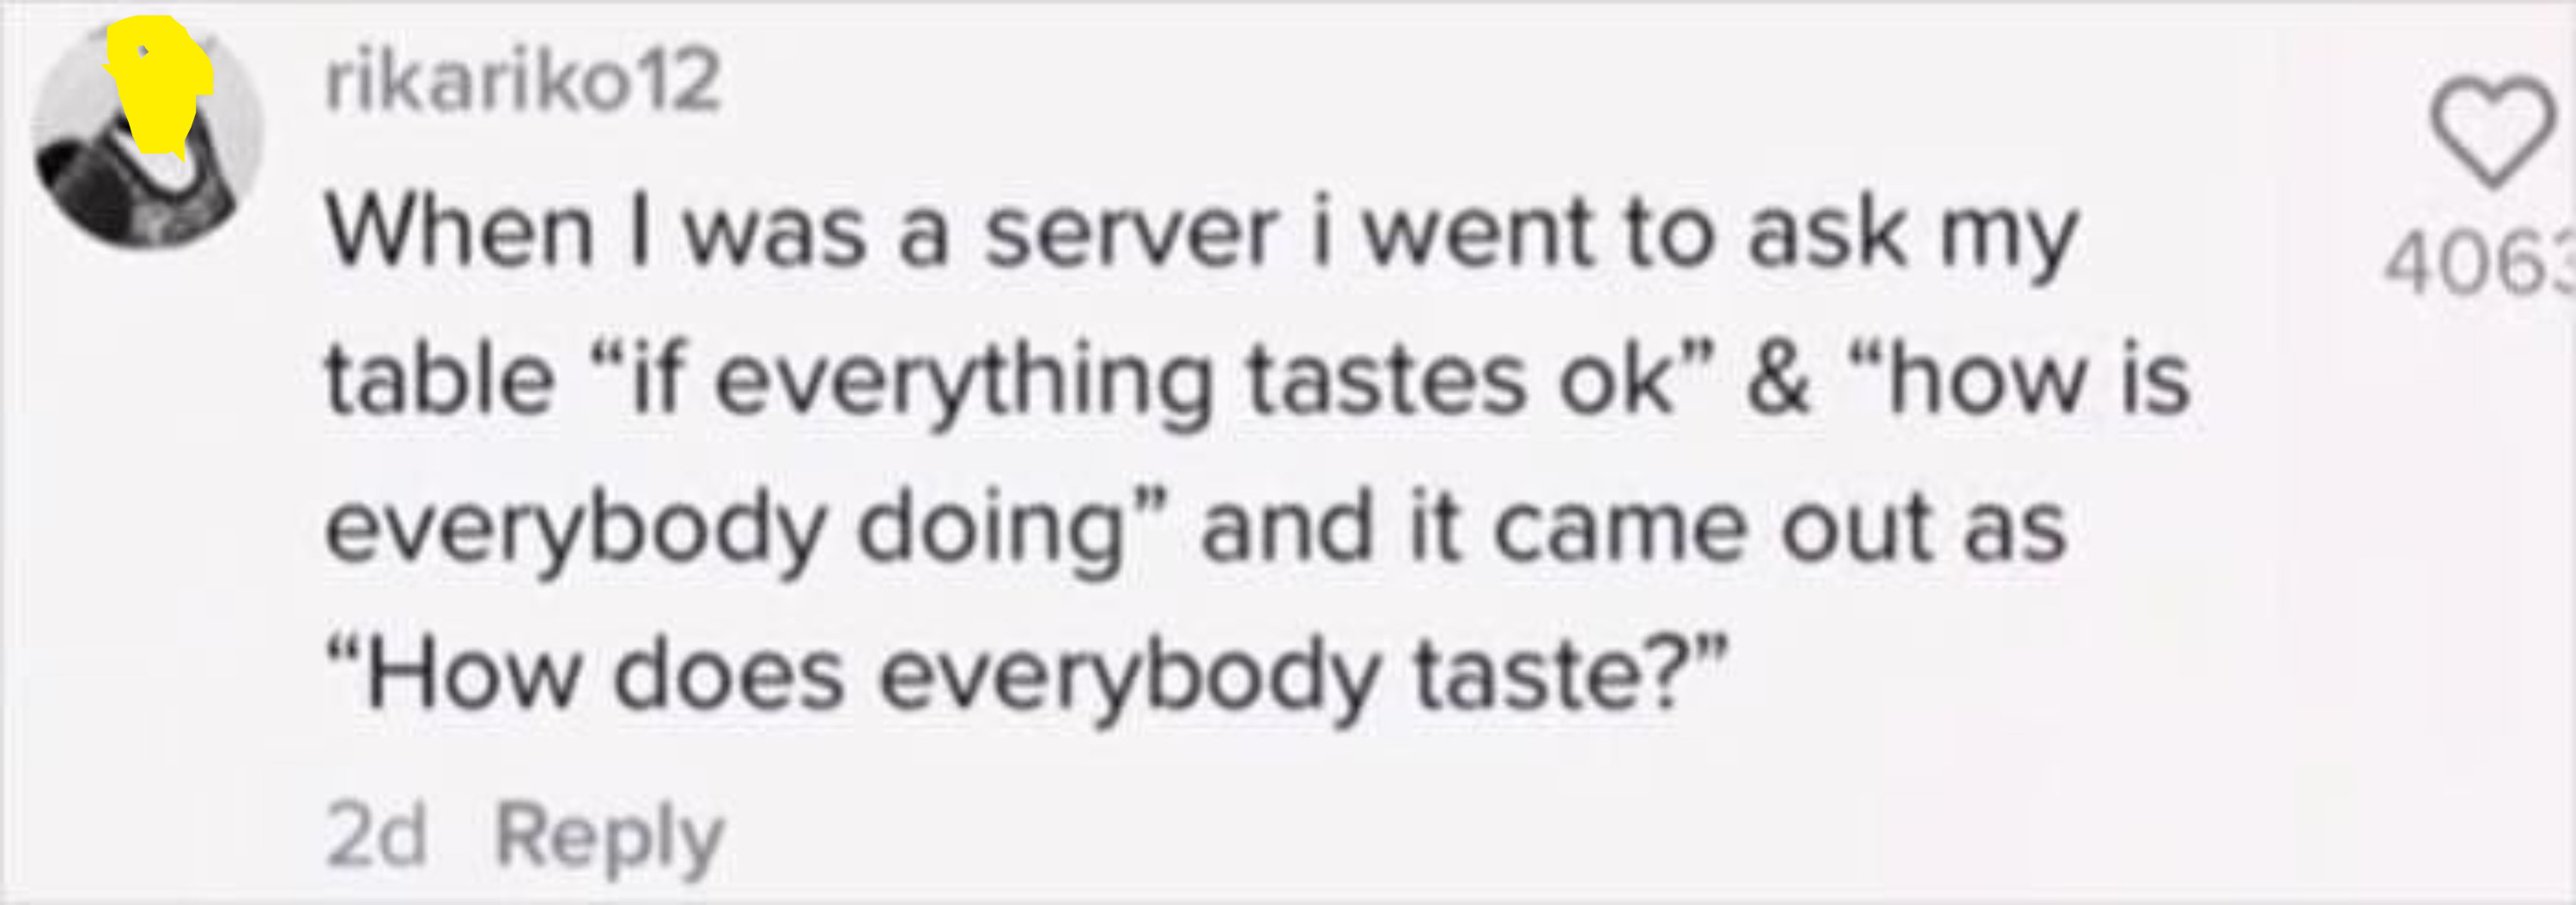 person asking how does everybody taste by mistake